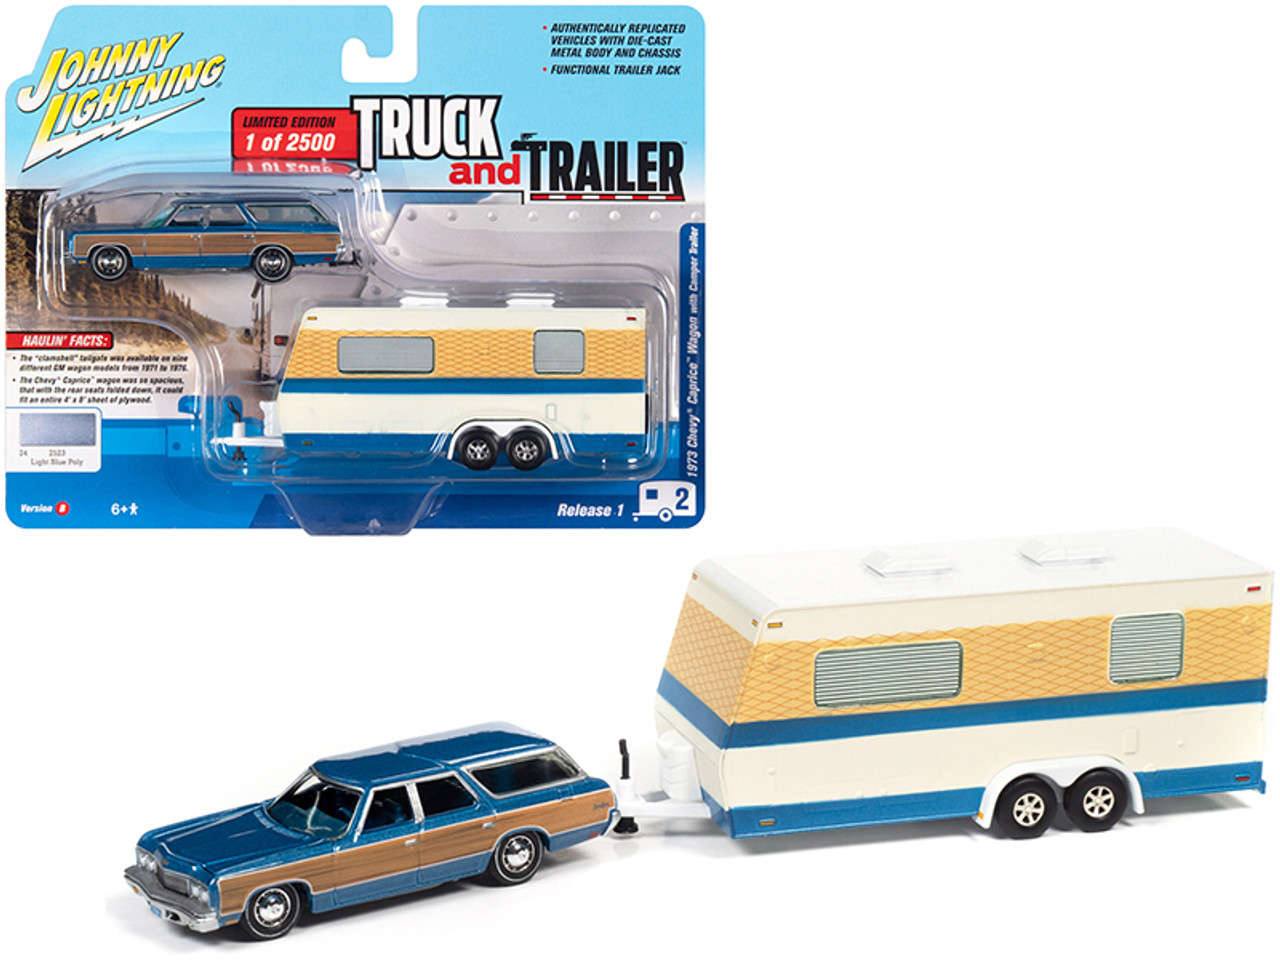 1973 Chevrolet Caprice Wagon Blue Metallic with Wood Paneling with Camper Trailer Limited Edition to 2500 pieces Worldwide "Truck and Trailer" Series 1 1/64 Diecast Model Car by Johnny Lightning